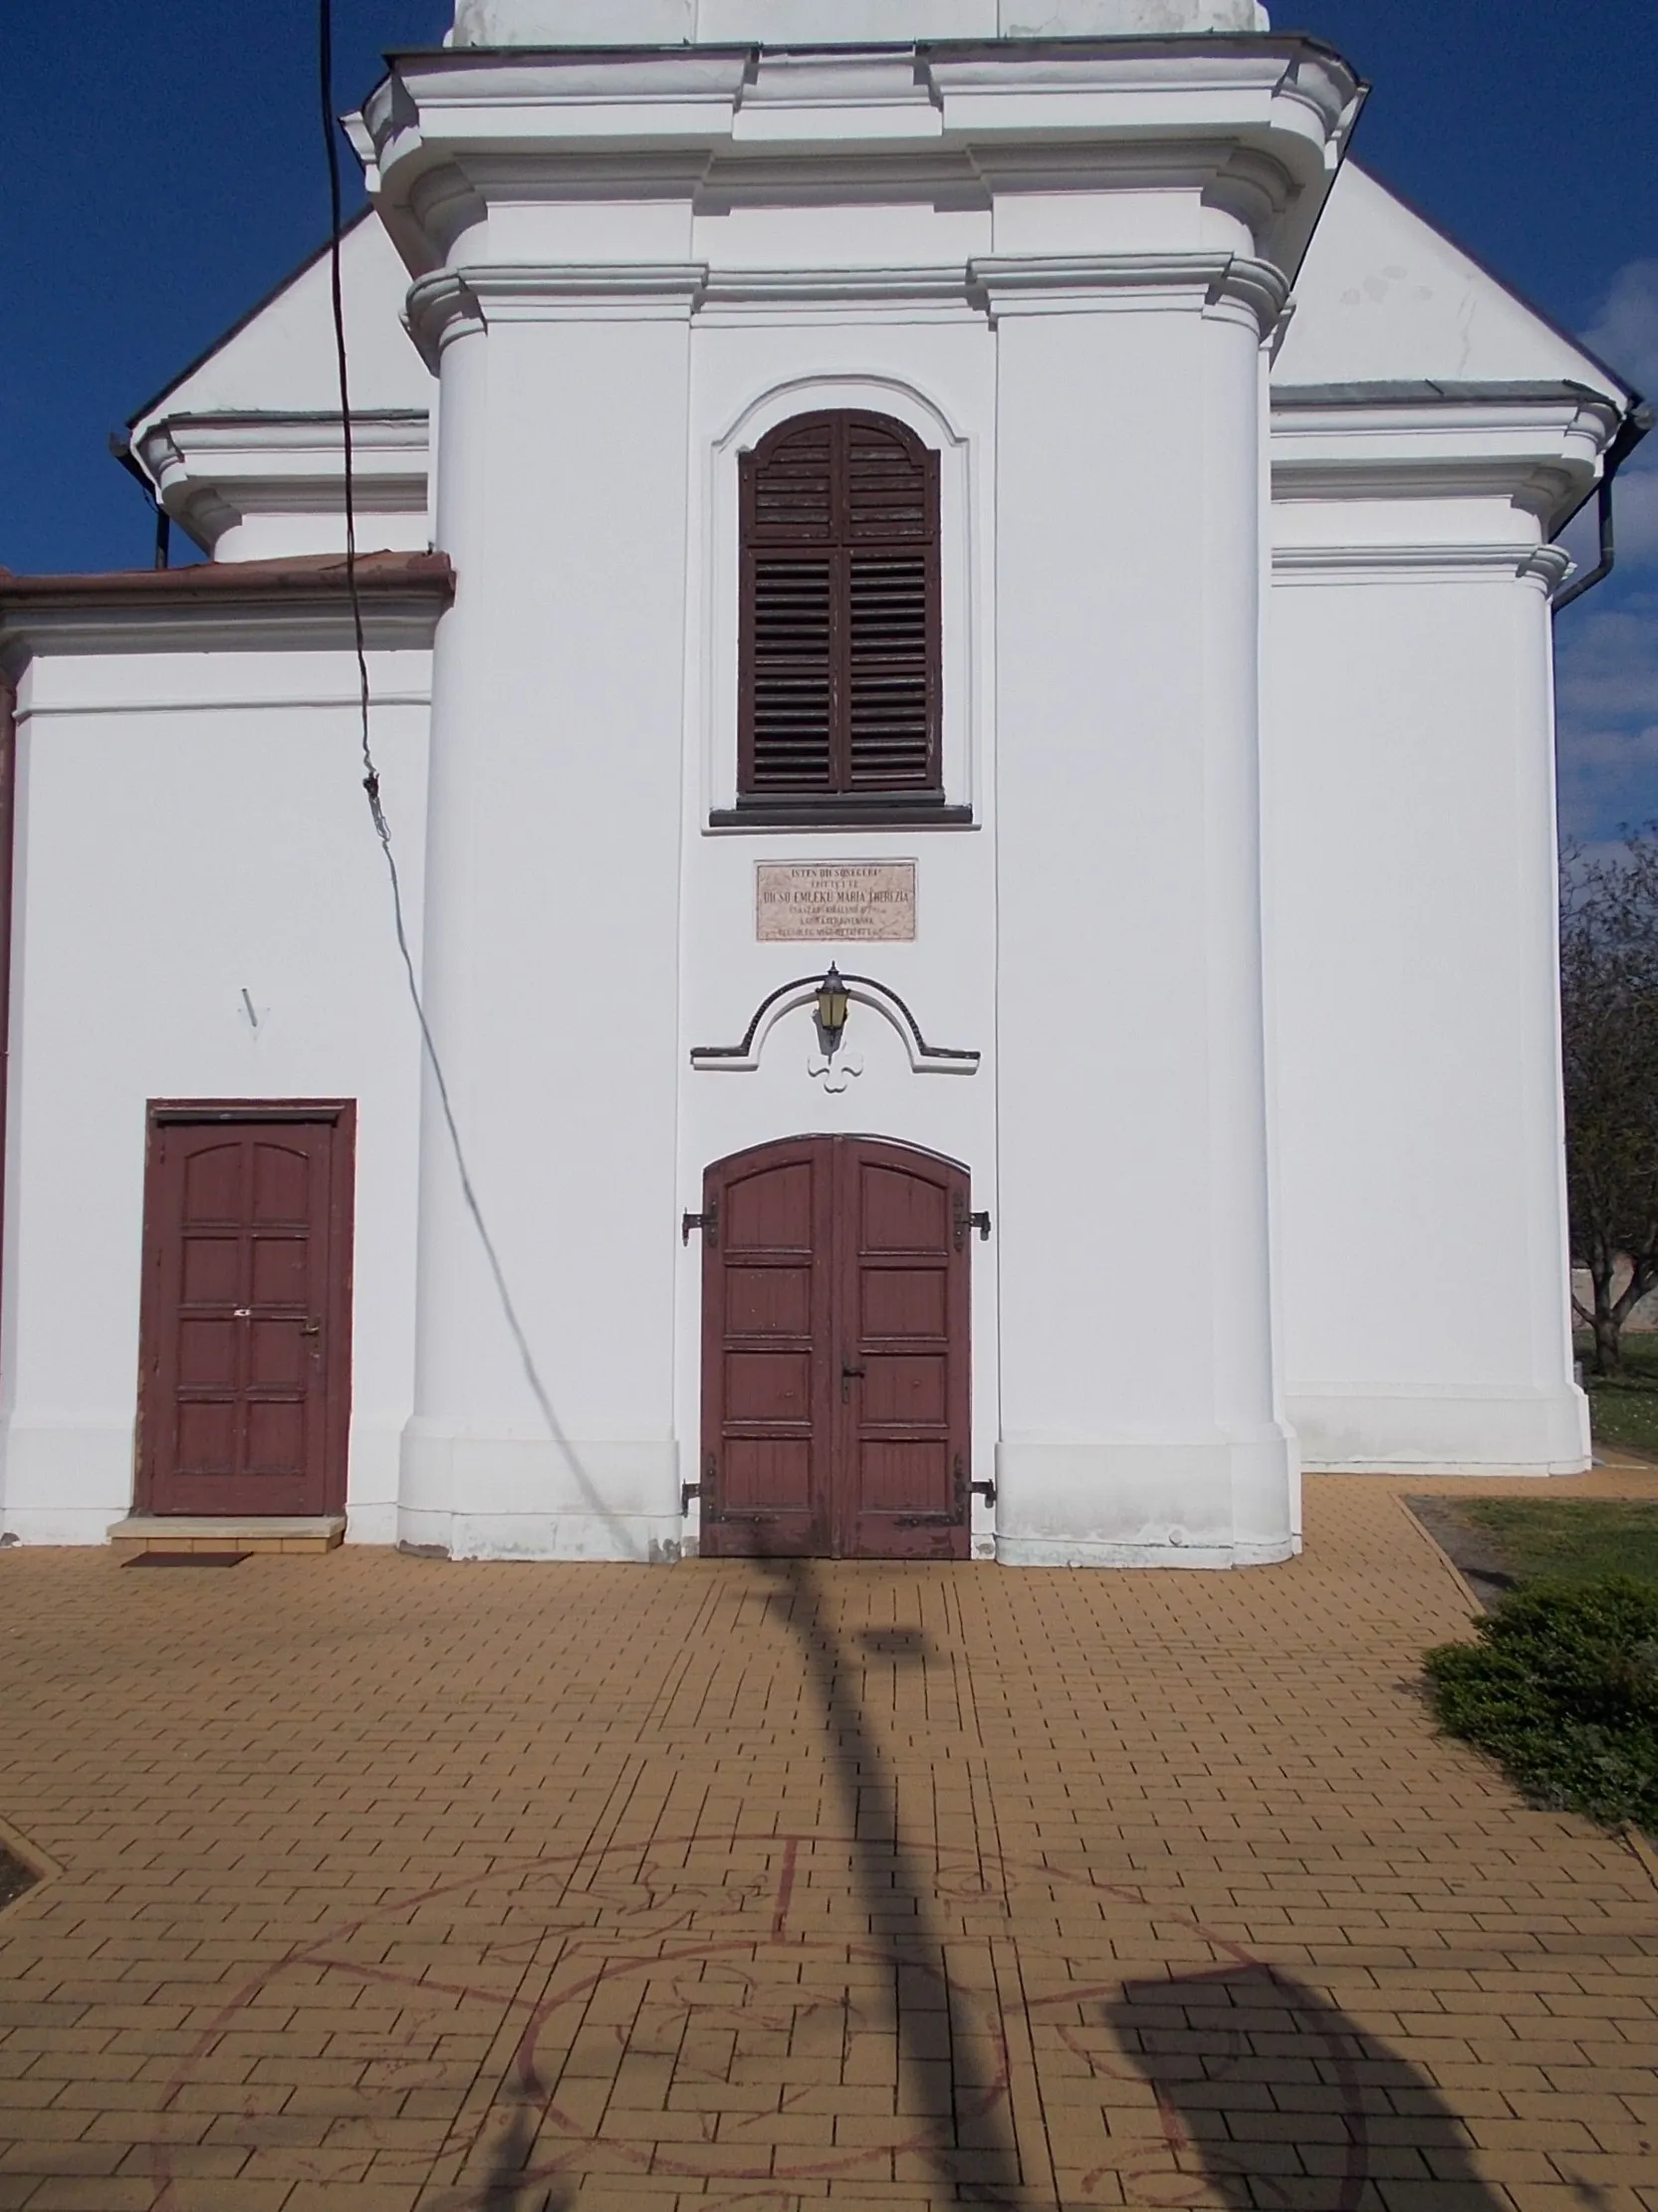 Photo showing: Greek Catholic Church /other names:  Intercession of the Theotokos / The Protection of the Mother of God Church / Church of Pokrov  /, built in 1777 and 1778, It has tiled roof since 1844. Extended in 1878. New choir/gallery, staircase, sacristy built. Renovated in 1978 and 2010. Baroque. Iconostas damaged in 1887 by lightning, repaired by local painter Ferenc Gosztincsár. Frescos are destroyed. New frescos painted by local painter Imre Torma in 1928. Teresa of Avila/Lisieux side altar built in 1933, its altarpiece painted by painter József Choma. Neoclassical pulpit. Rococo stairs. Copf (late Mid-East European Baroque style) benches. - Facade plaque: "It was built for the glory of God by Emperor and Queen Maria Theresa of glorious memory in 1778 for the Greek Catholic faithful. Offal renewed in 1887." - Churchyard stone crucifix (decorated with icons) installed in 1886. Early 19th century brick fence is a unique in the region. Listed church - Templom Alley and Toldi Street corner , Makó, Csongrád-Csanád County, Hungary.